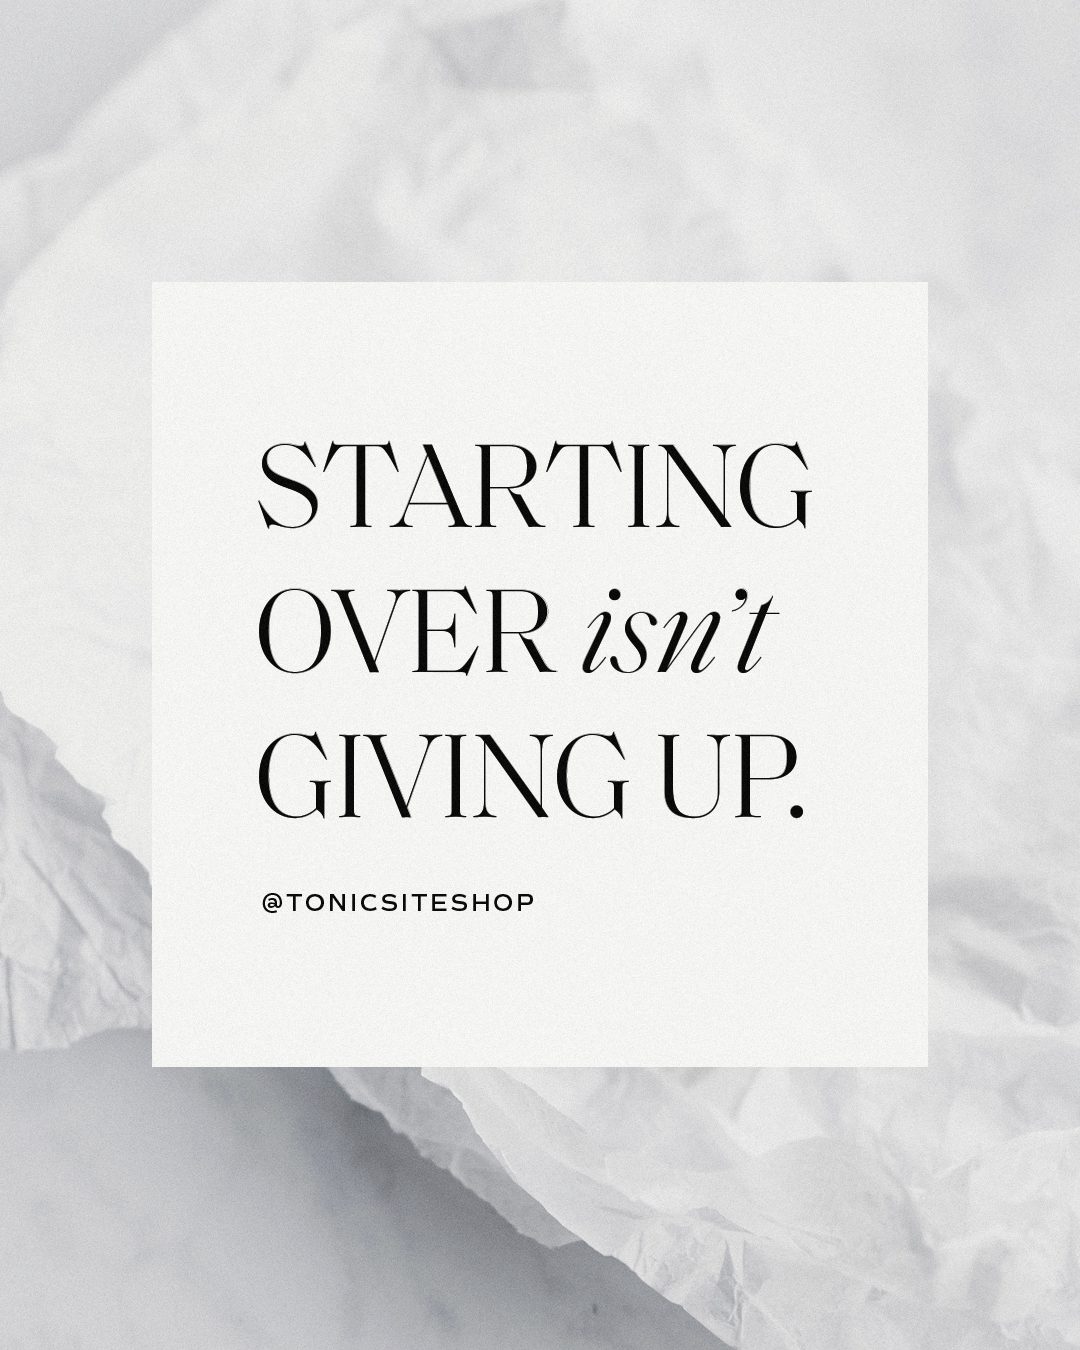 Starting Over Isn't Giving Up